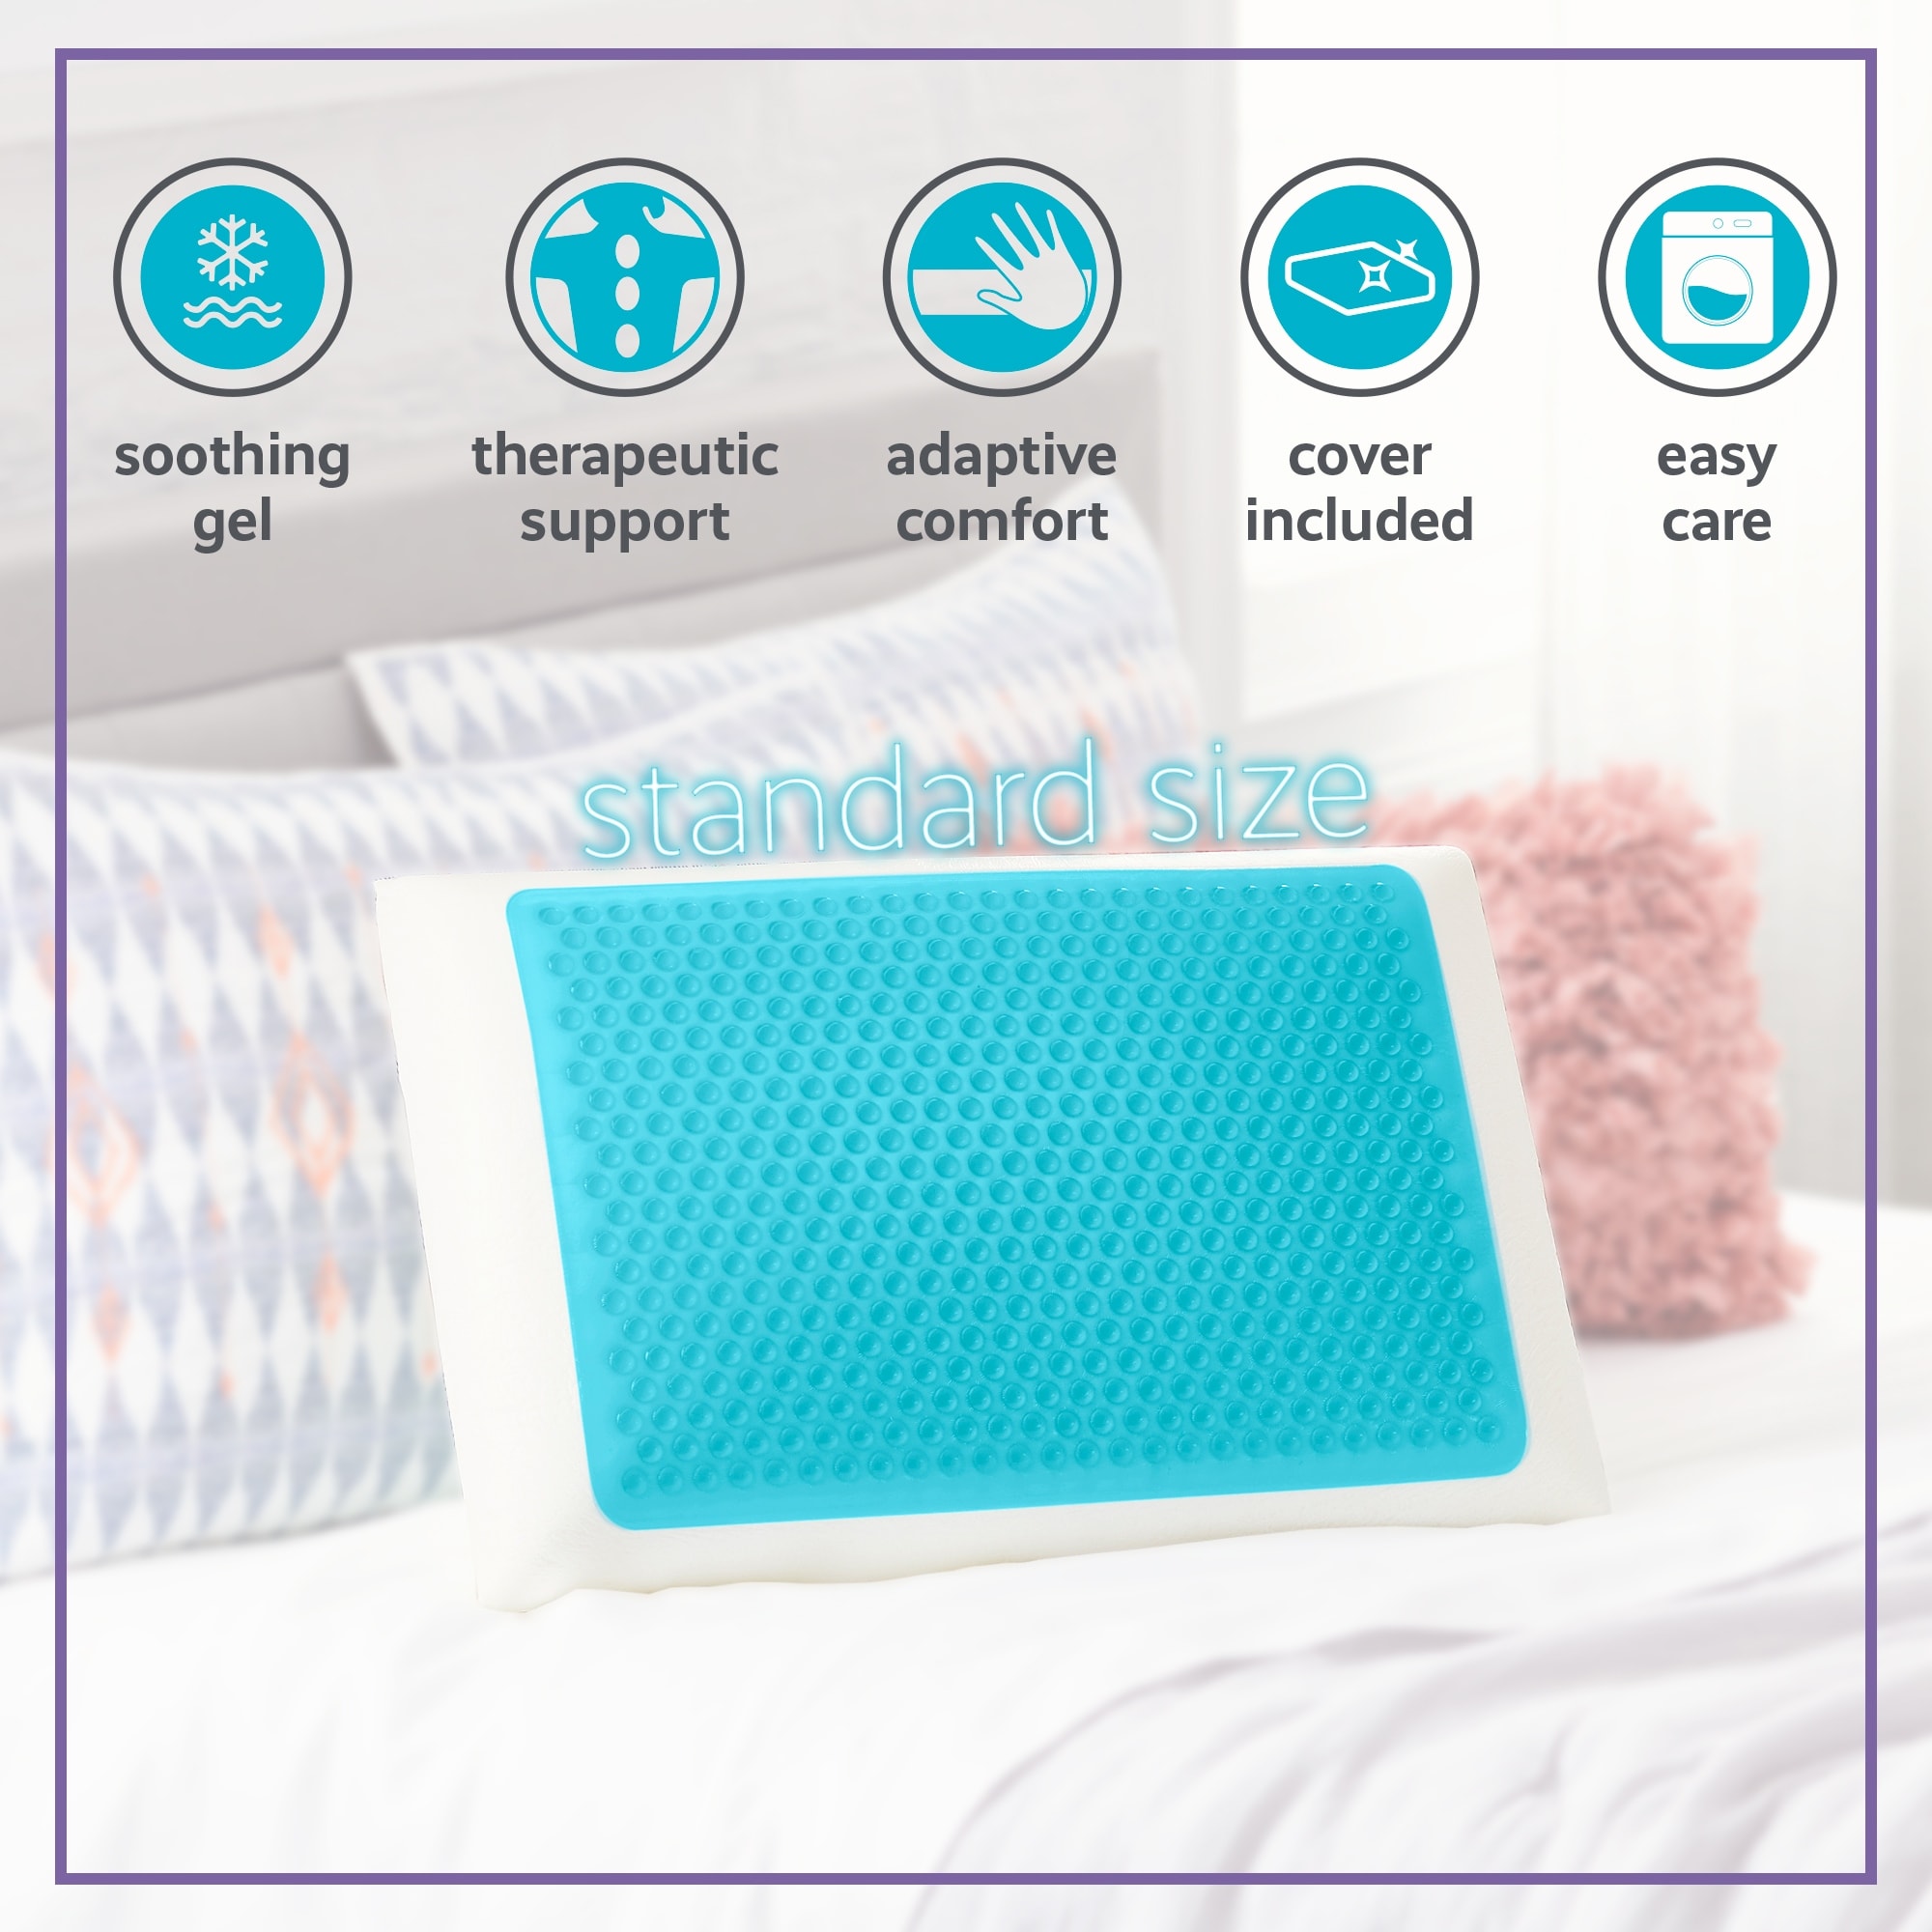 https://ak1.ostkcdn.com/images/products/is/images/direct/78ccfd748158ad2442ddc830035f2fd6bfb61f7d/Comfort-Revolution-Blue-Bubble-Gel-and-Memory-Foam-Pillow.jpg